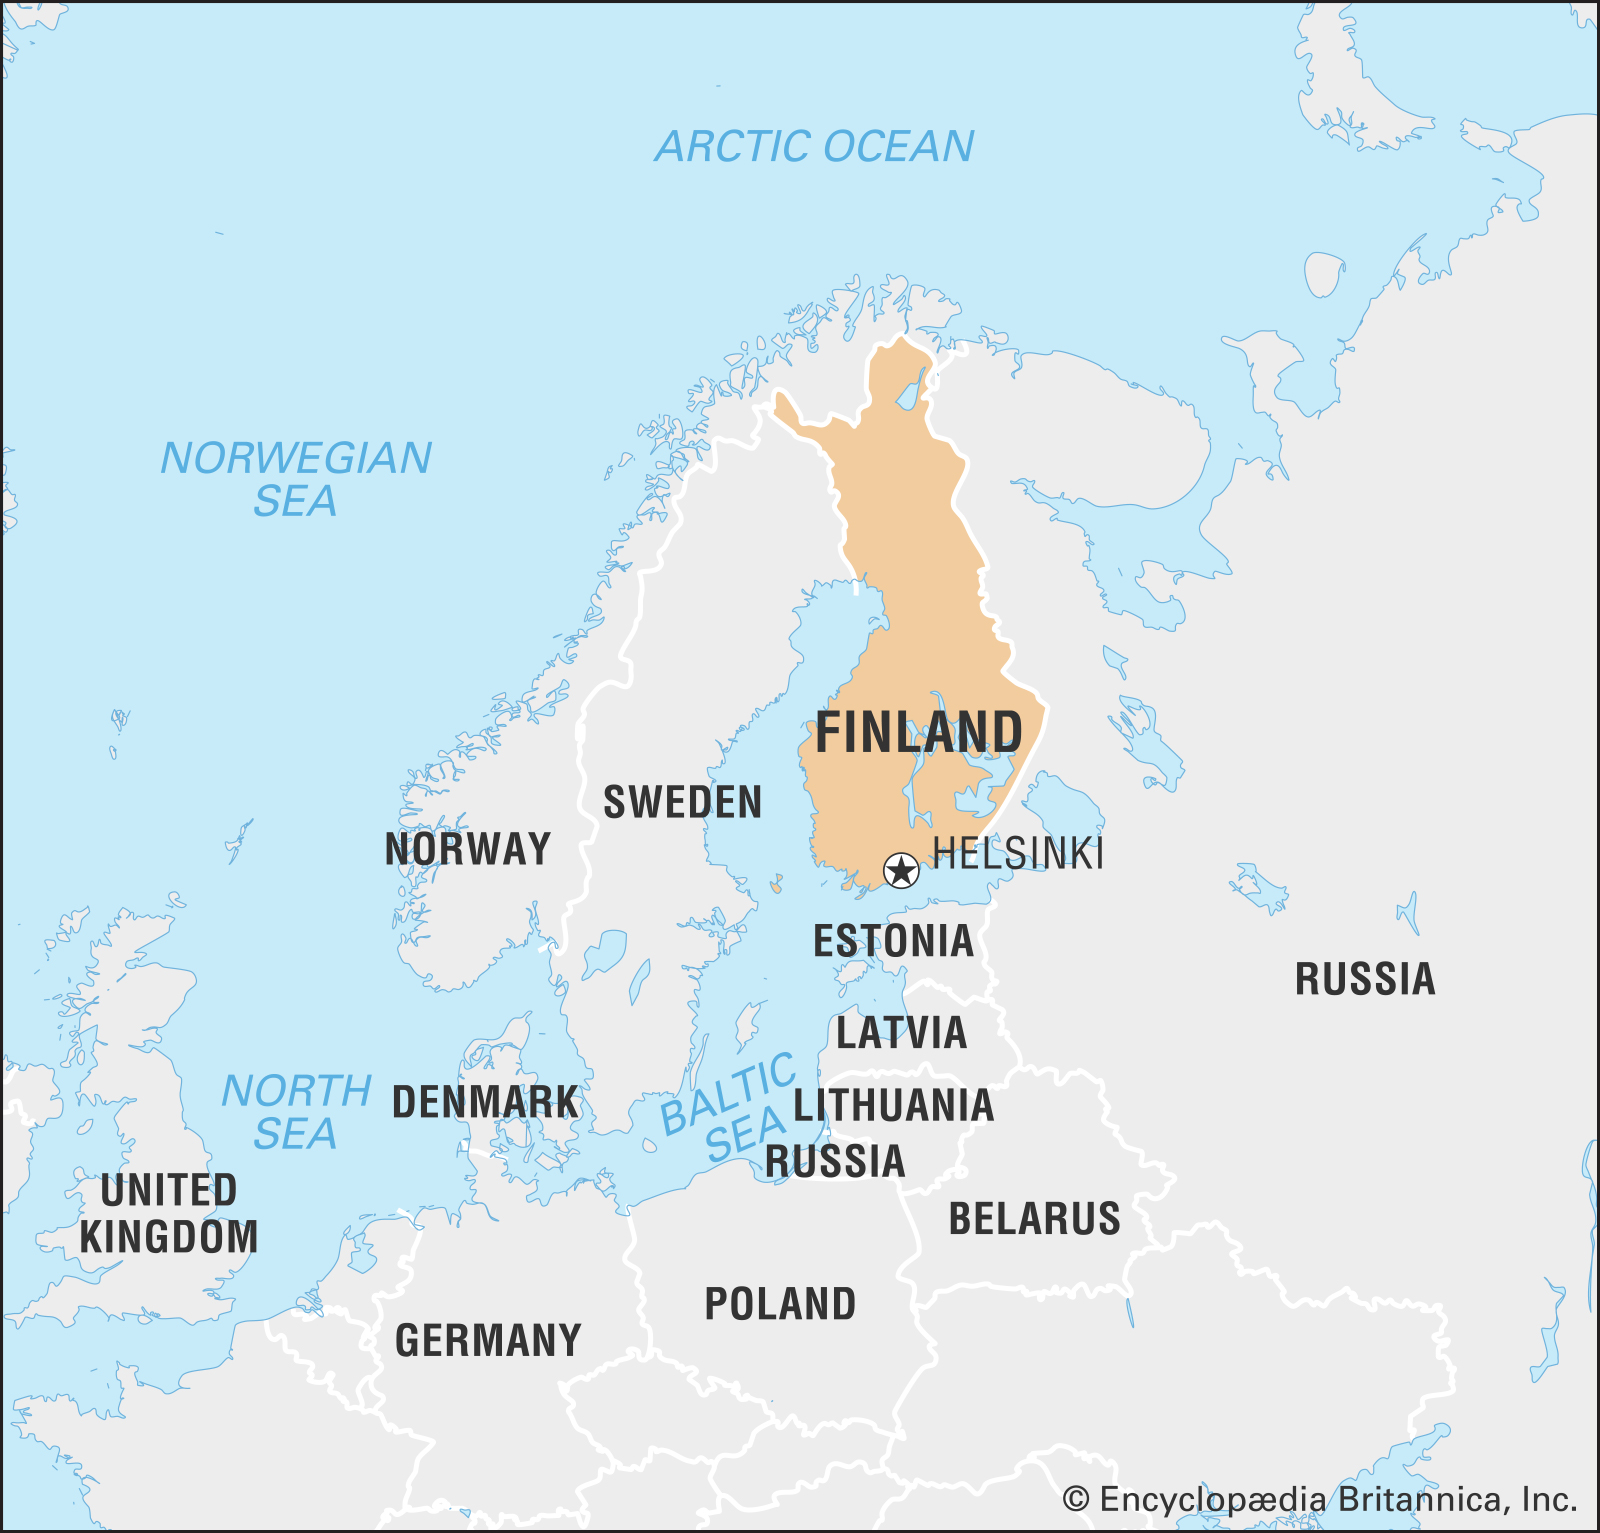 A map of Finland and nearby countries